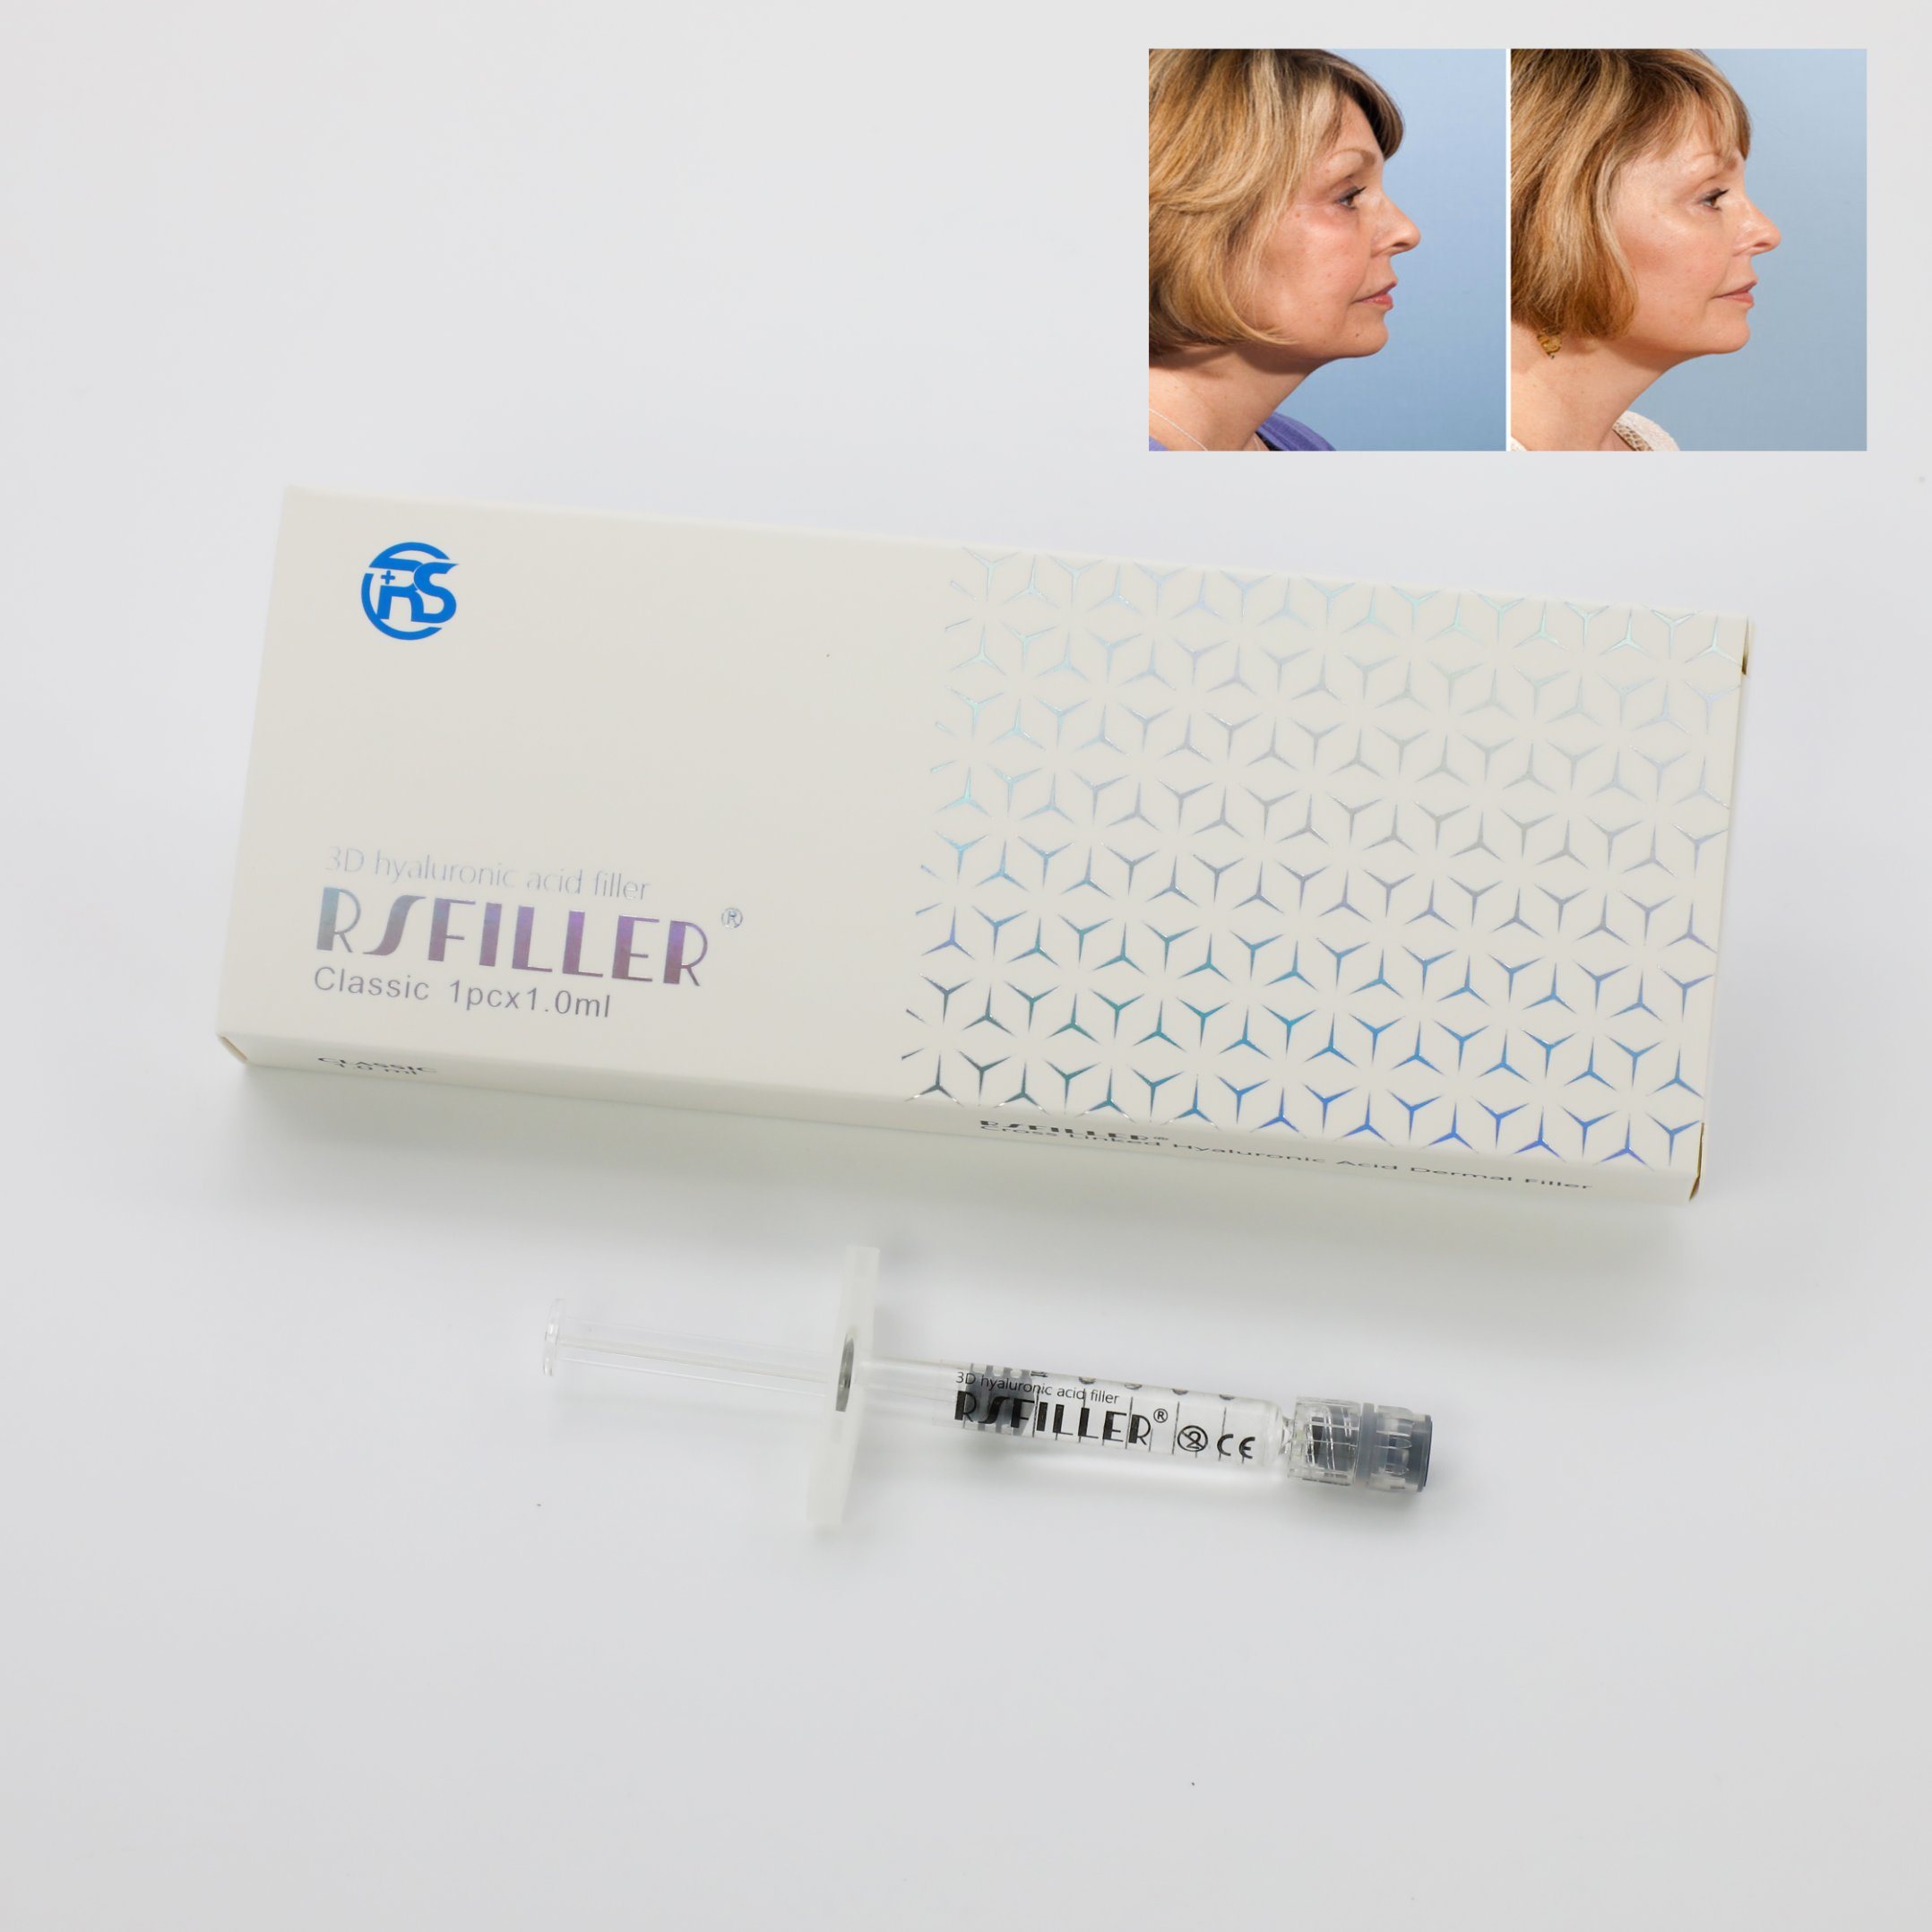 Professional Top Manufacturer 1ml Ha Injection Filler Hyaluronic Acid for Anti-Aging